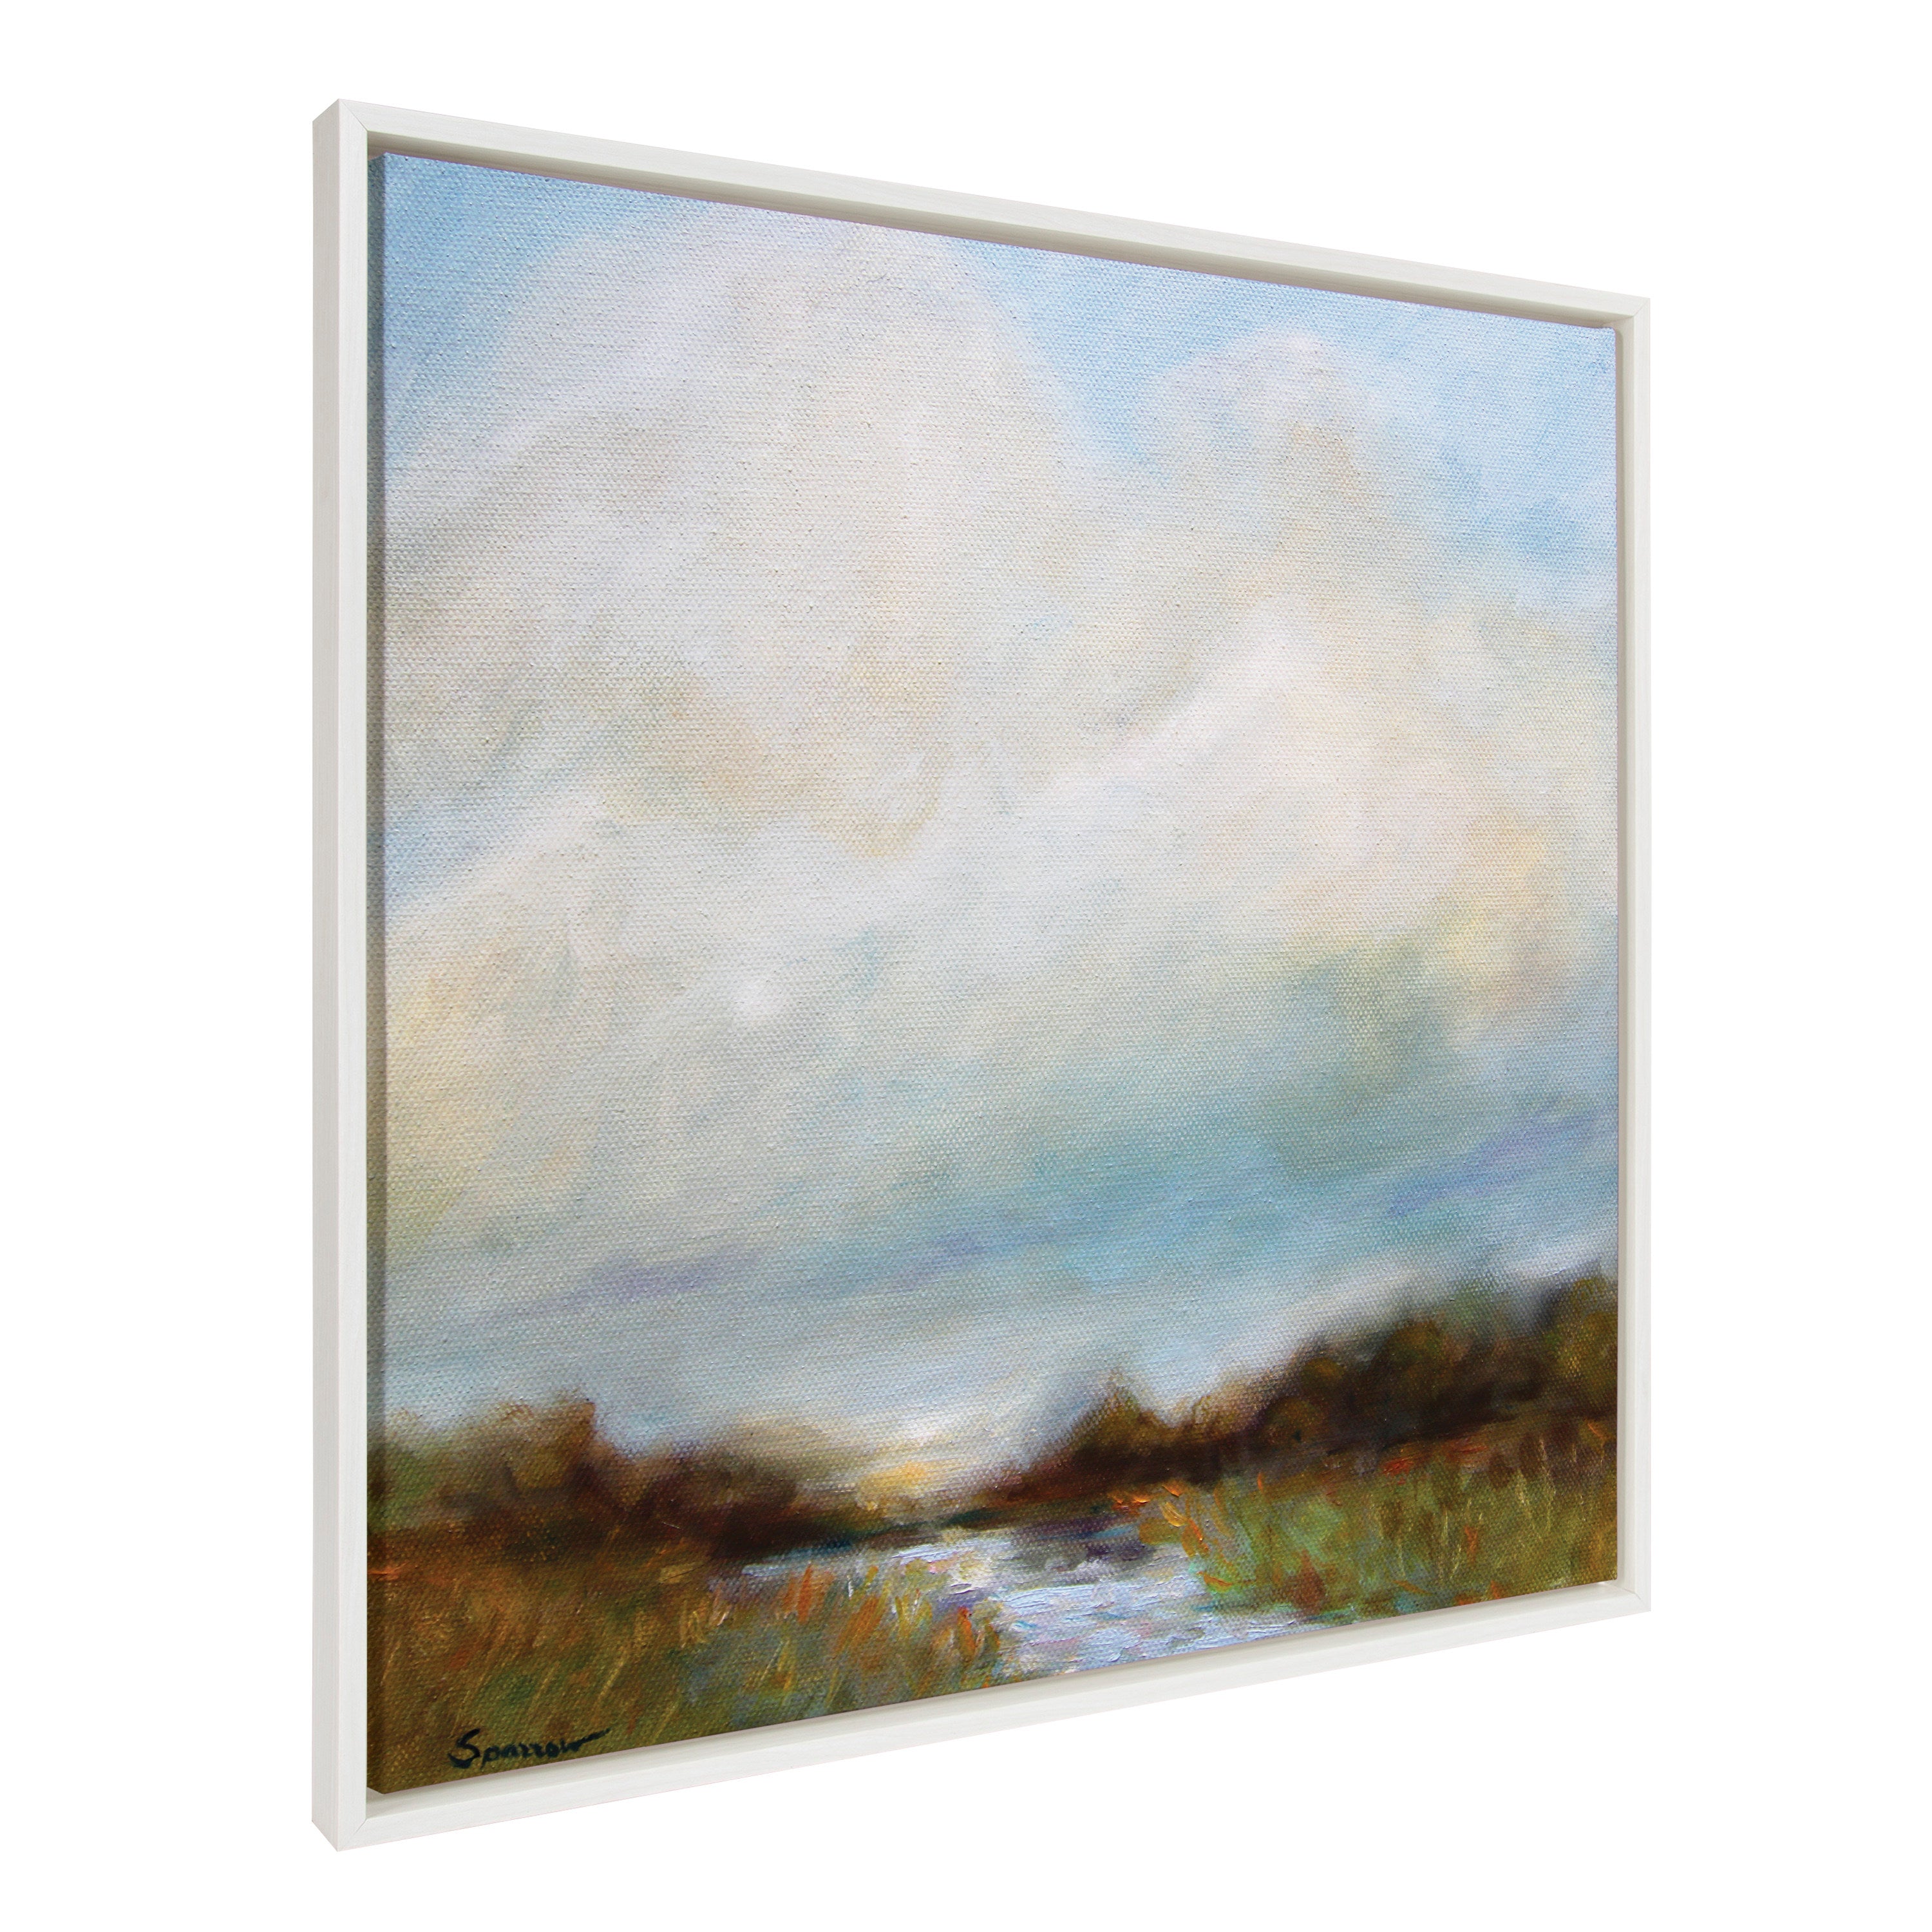 Sylvie Tranquility Framed Canvas by Mary Sparrow